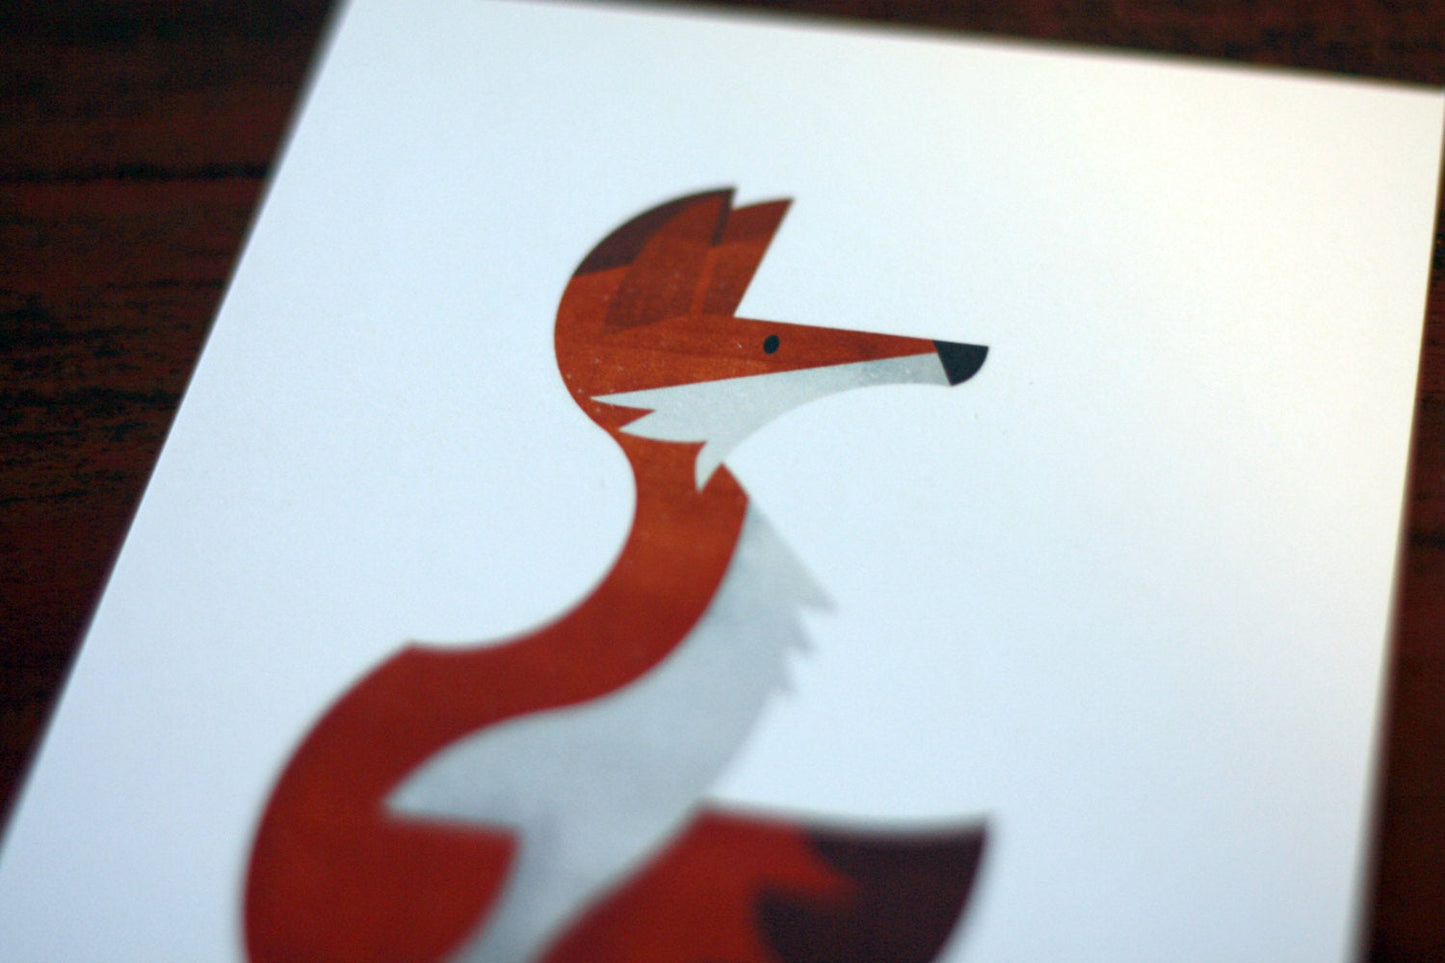 Red Fox - Signed 5x7" Print